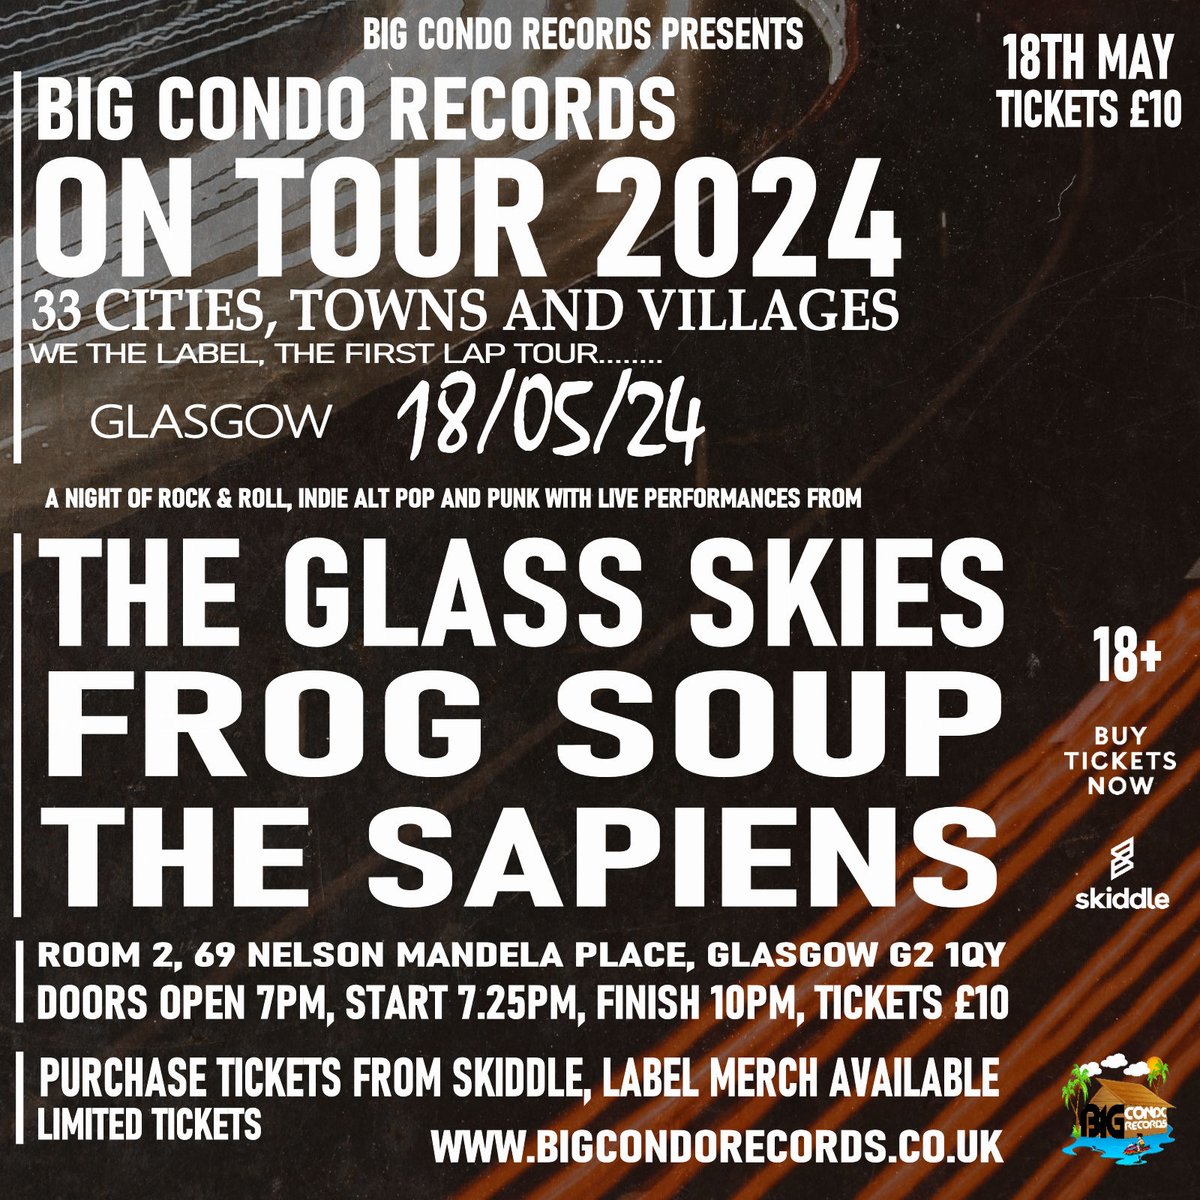 TONIGHT! 7-10pm @BigCondoRecords presents... 7.25 - 8.05 The Sapiens. 8.20 - 9 Frog Soup. 9.15 - 10 The Glass Skies. £12 entry on the door (cash or card). 18+.